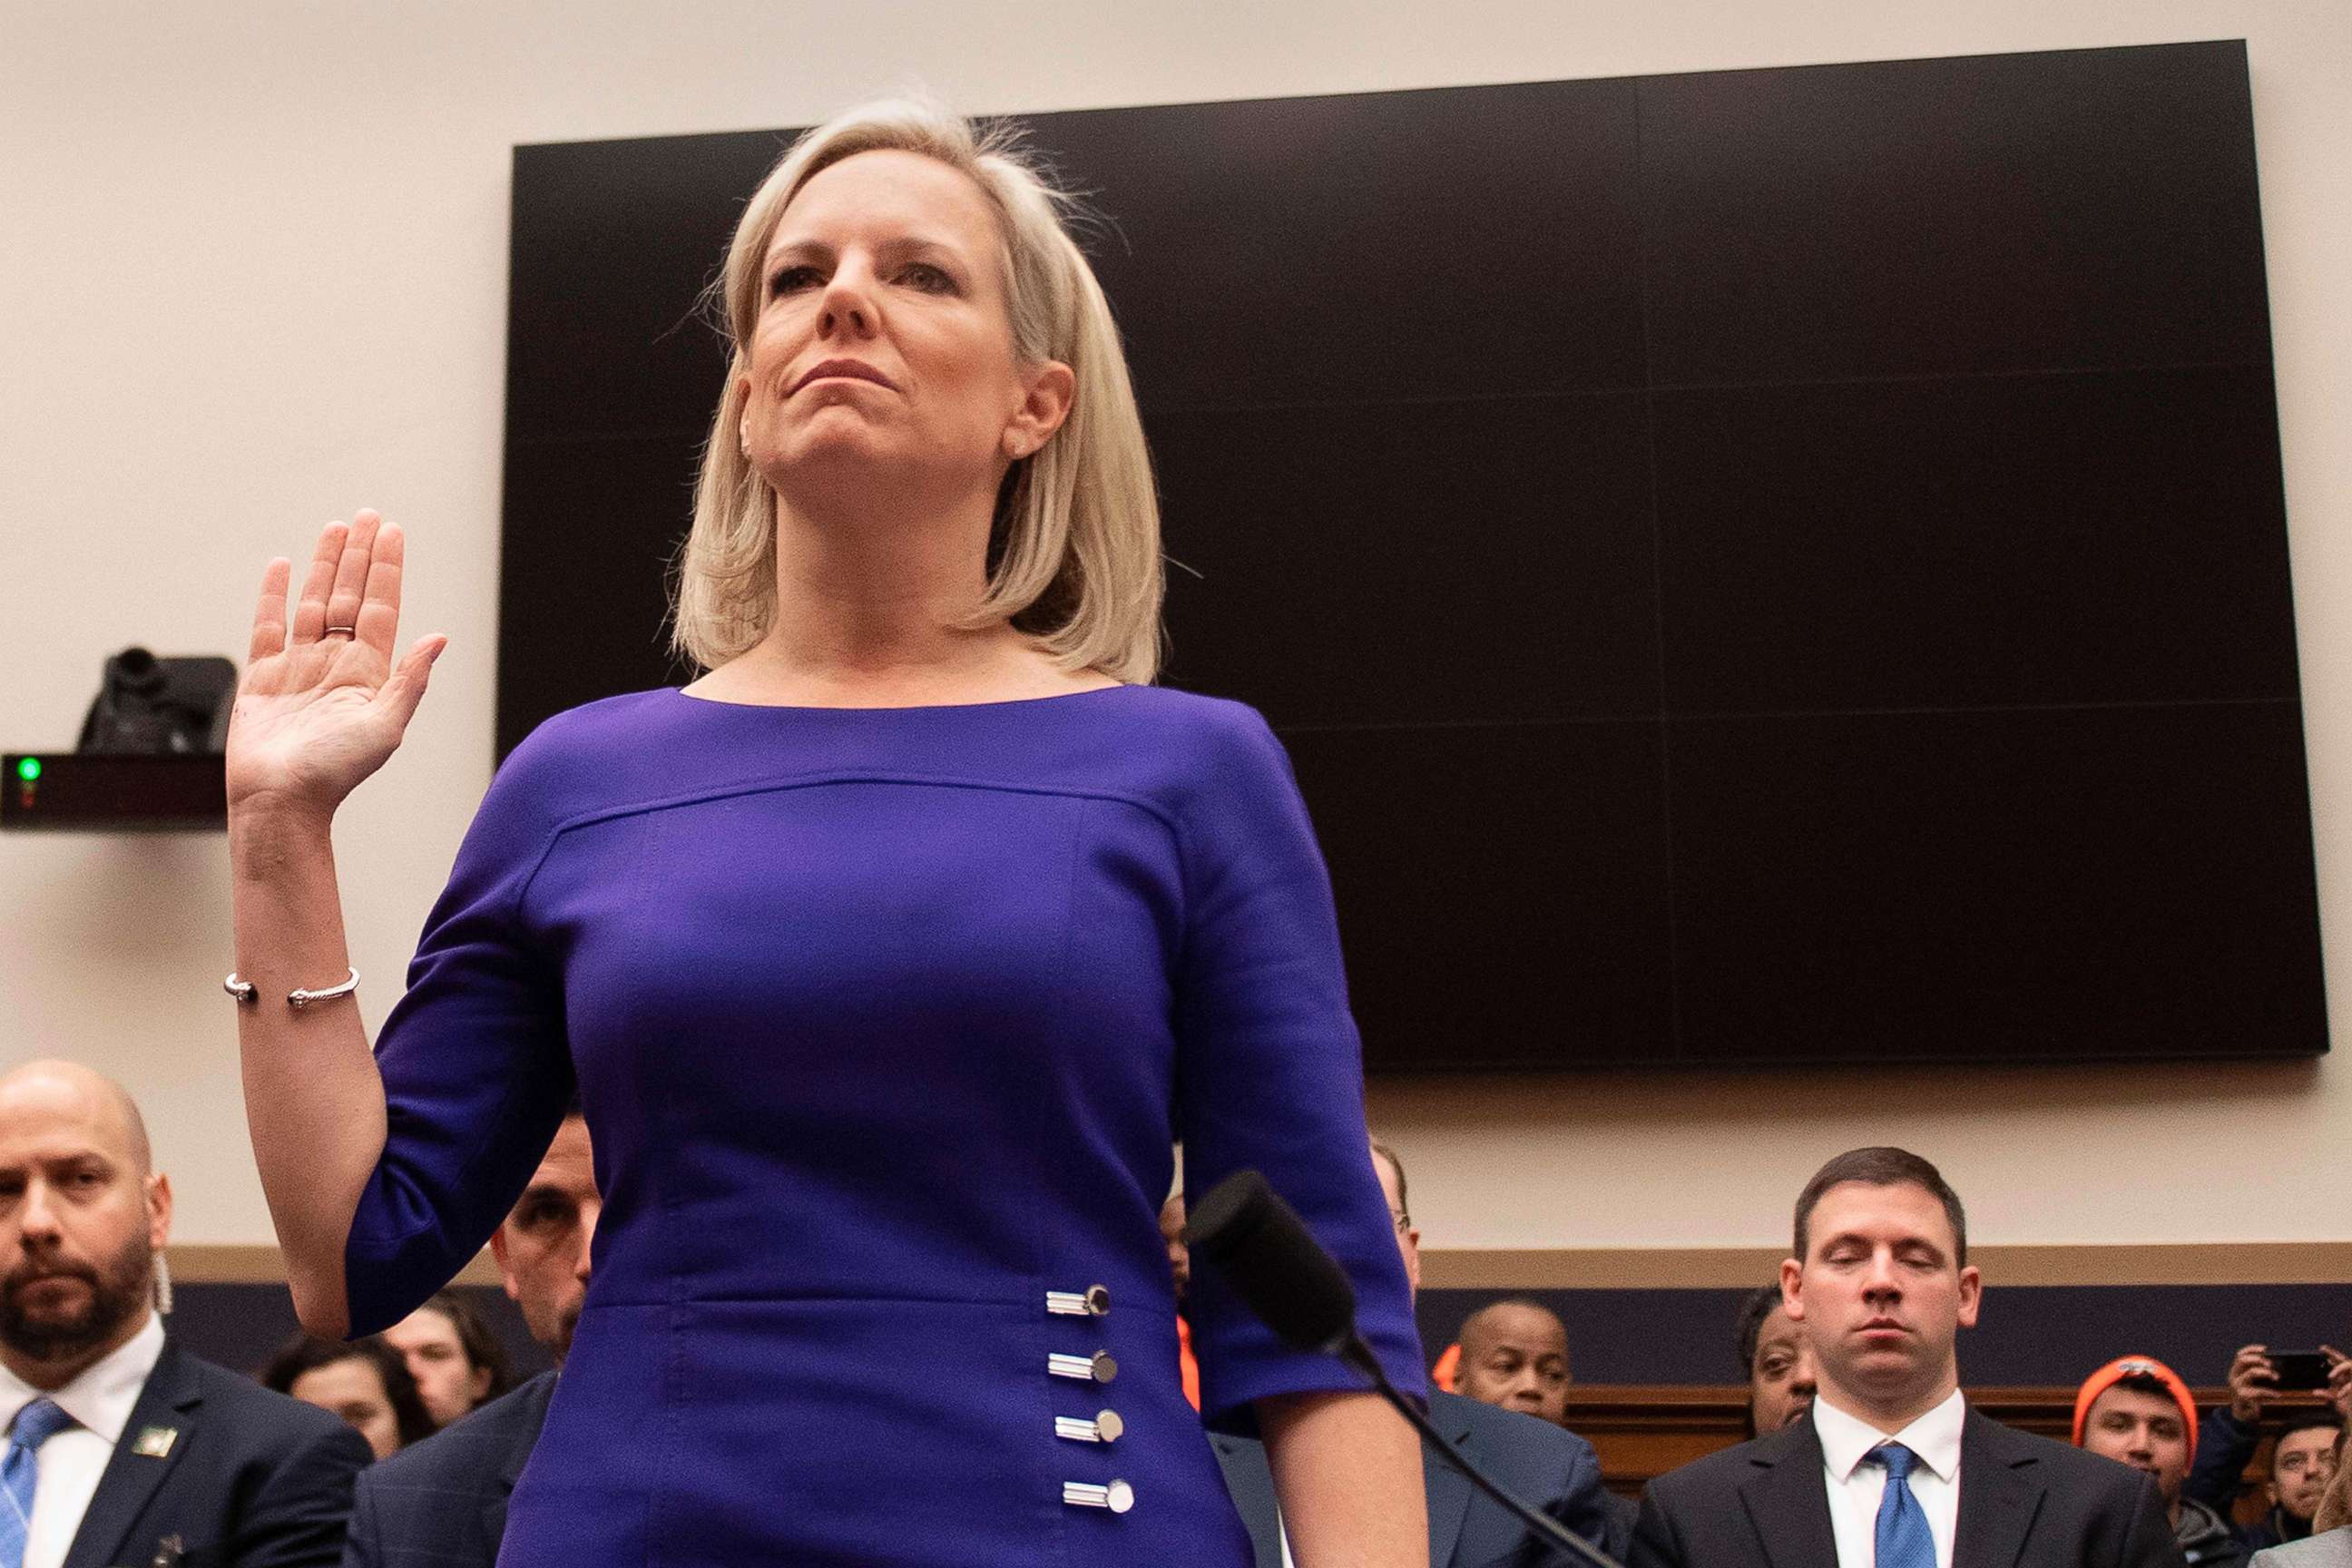 PHOTO: Secretary of Homeland Security Kirstjen Nielsen is sworn in ahead of her testimony to the Judiciary Committee on "Homeland Security Oversight" in Washington, D.C., Dec. 20, 2018.